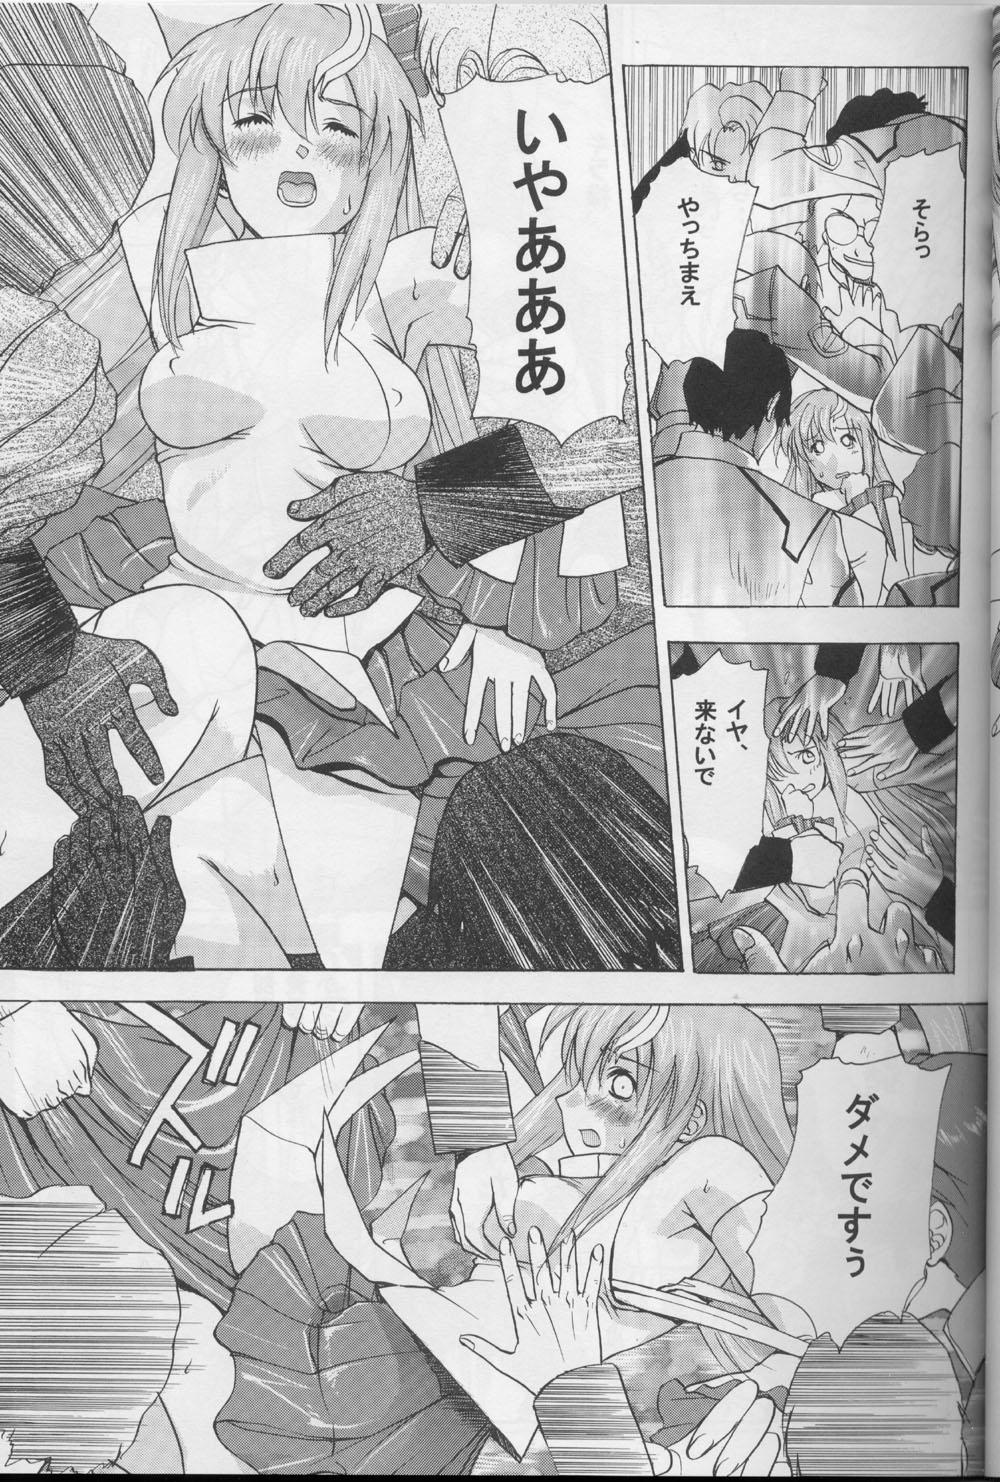 Relax G-SEED girls - Gundam seed Big Cock - Page 9